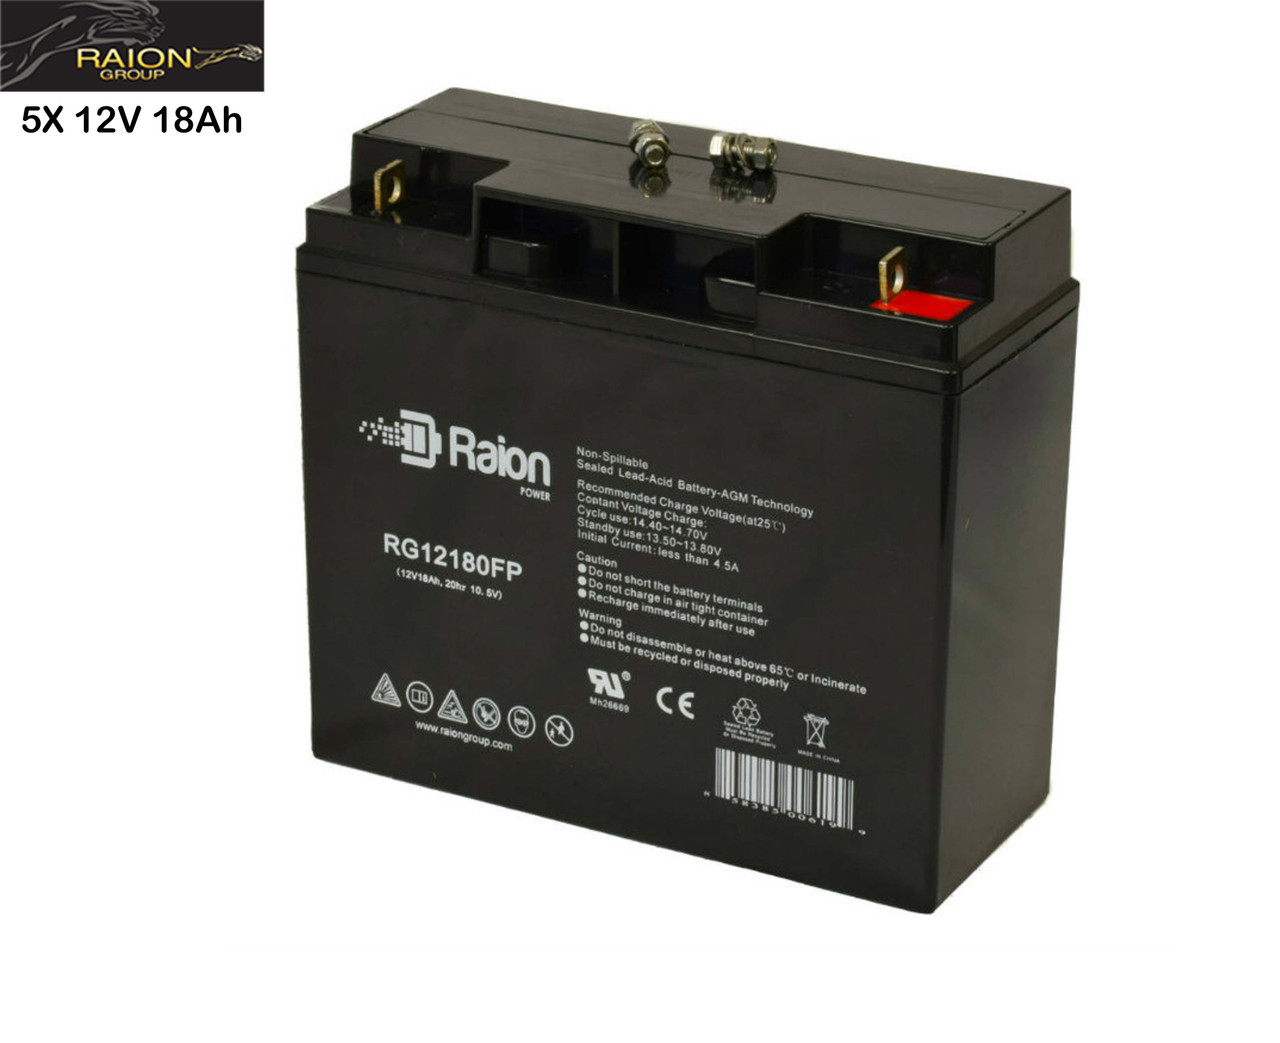 Raion Power Replacement 12V 18Ah Battery for Daymak Beijing - 5 Pack